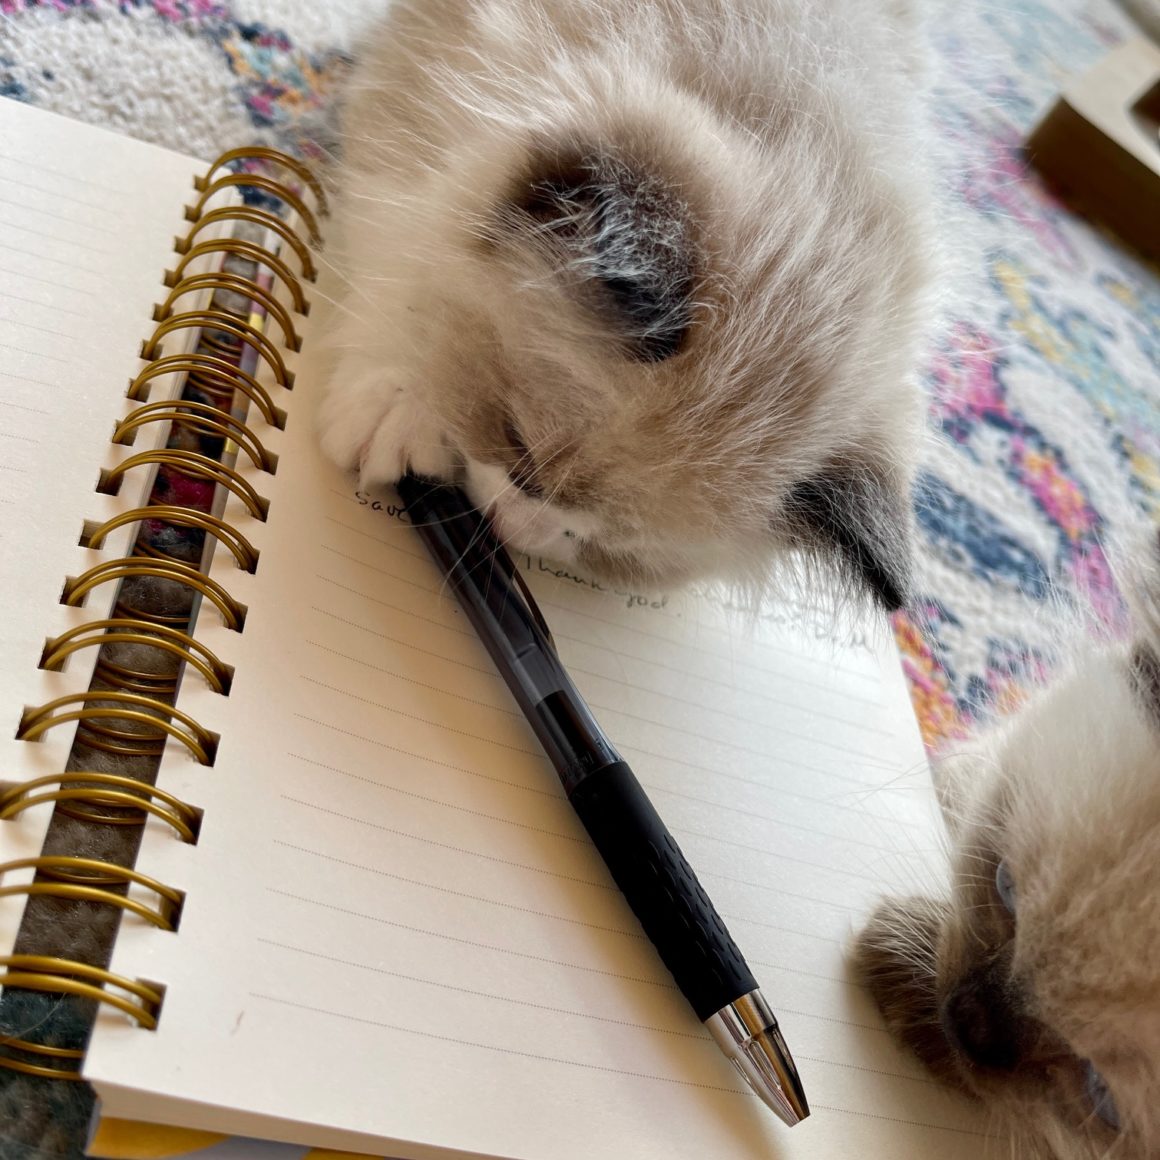 two white ragdoll kittens sitting on open notebook playing with pen